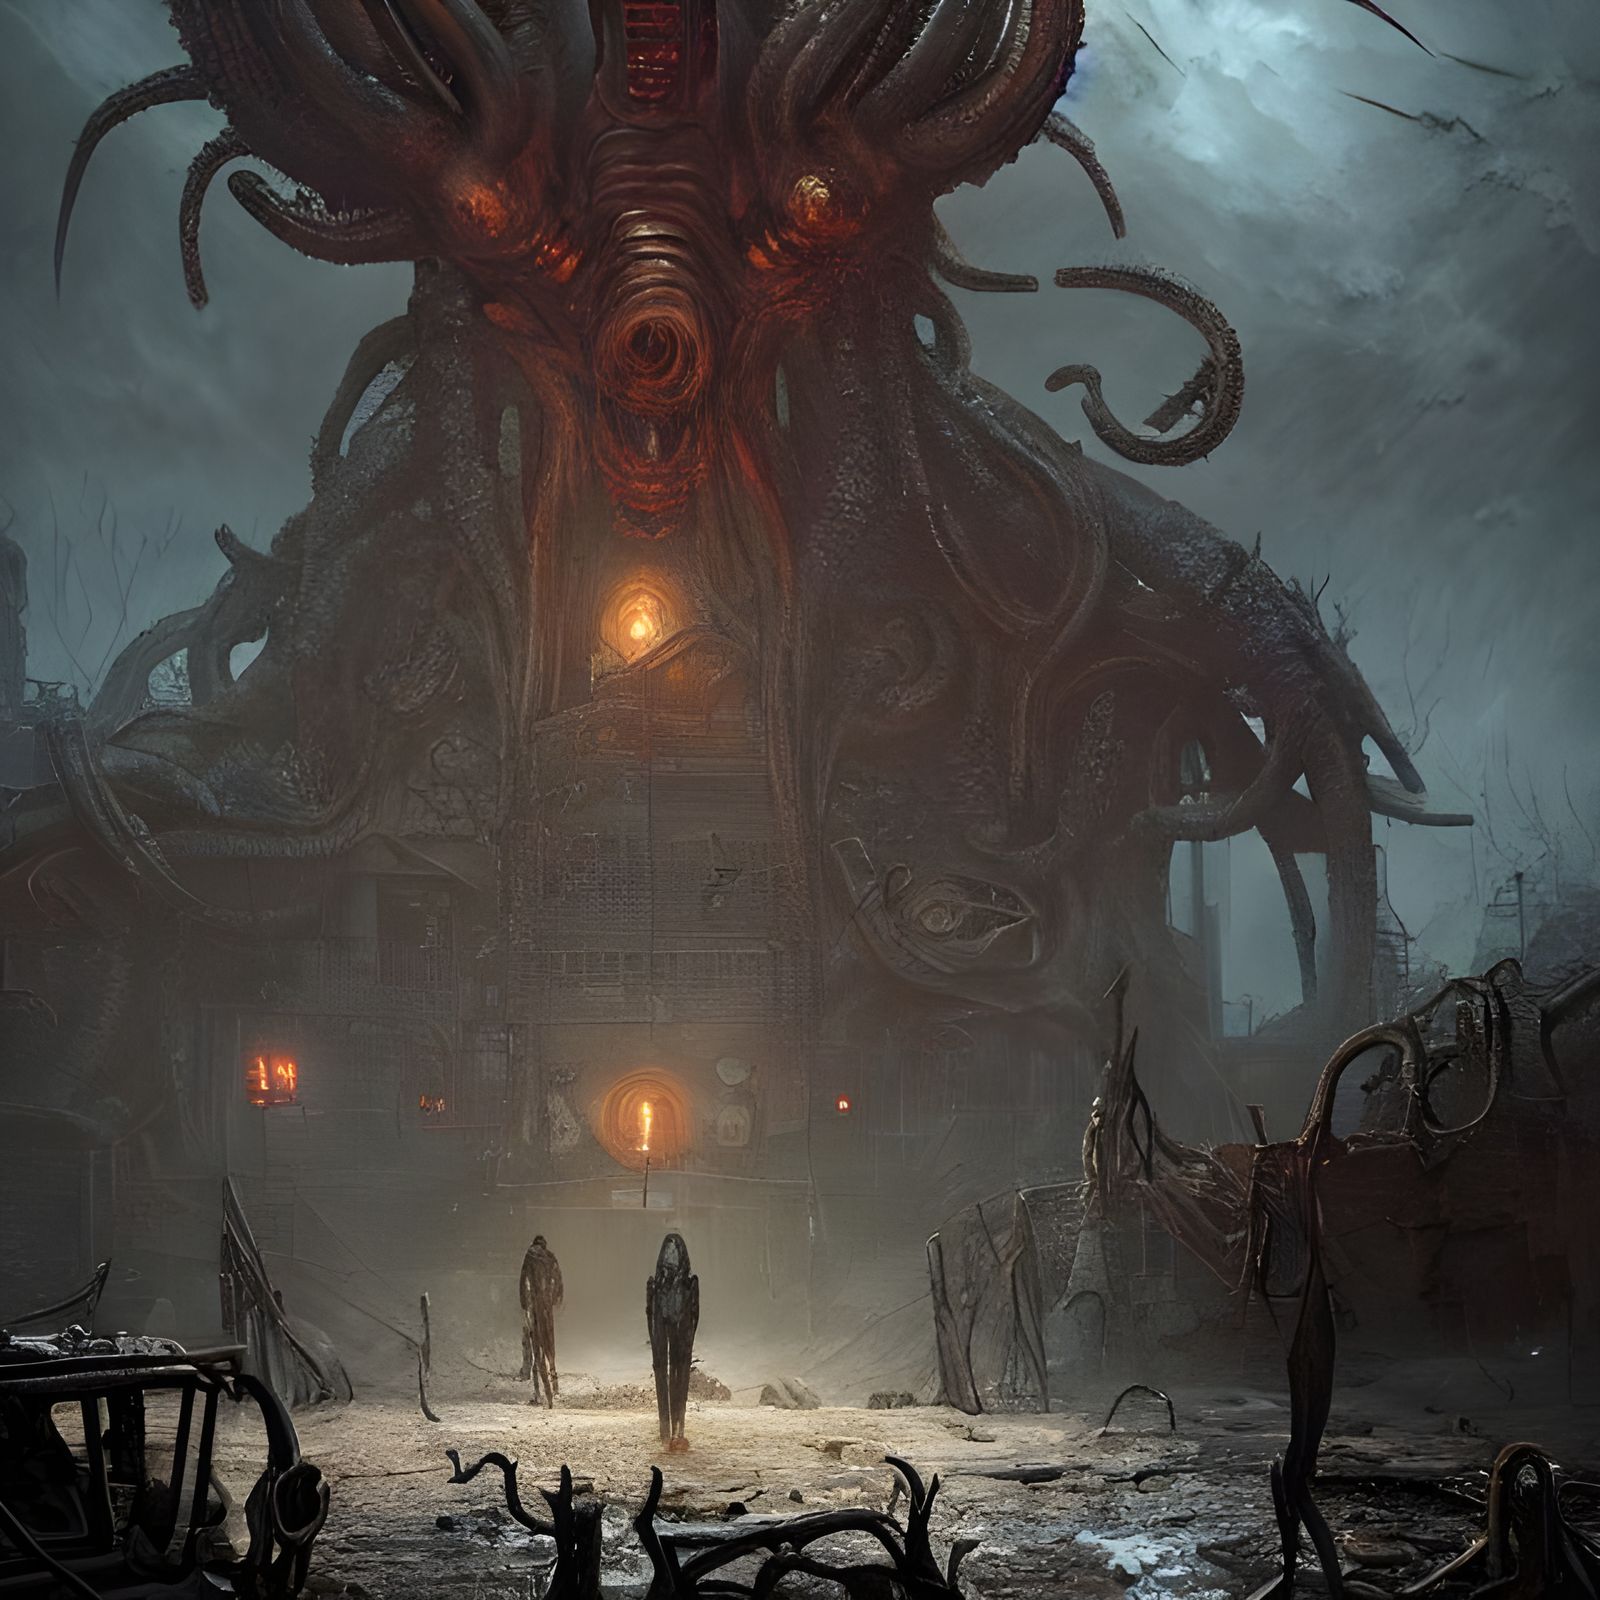 Post-Apocalyptic World Ruined by a H P Lovcraft Elder god